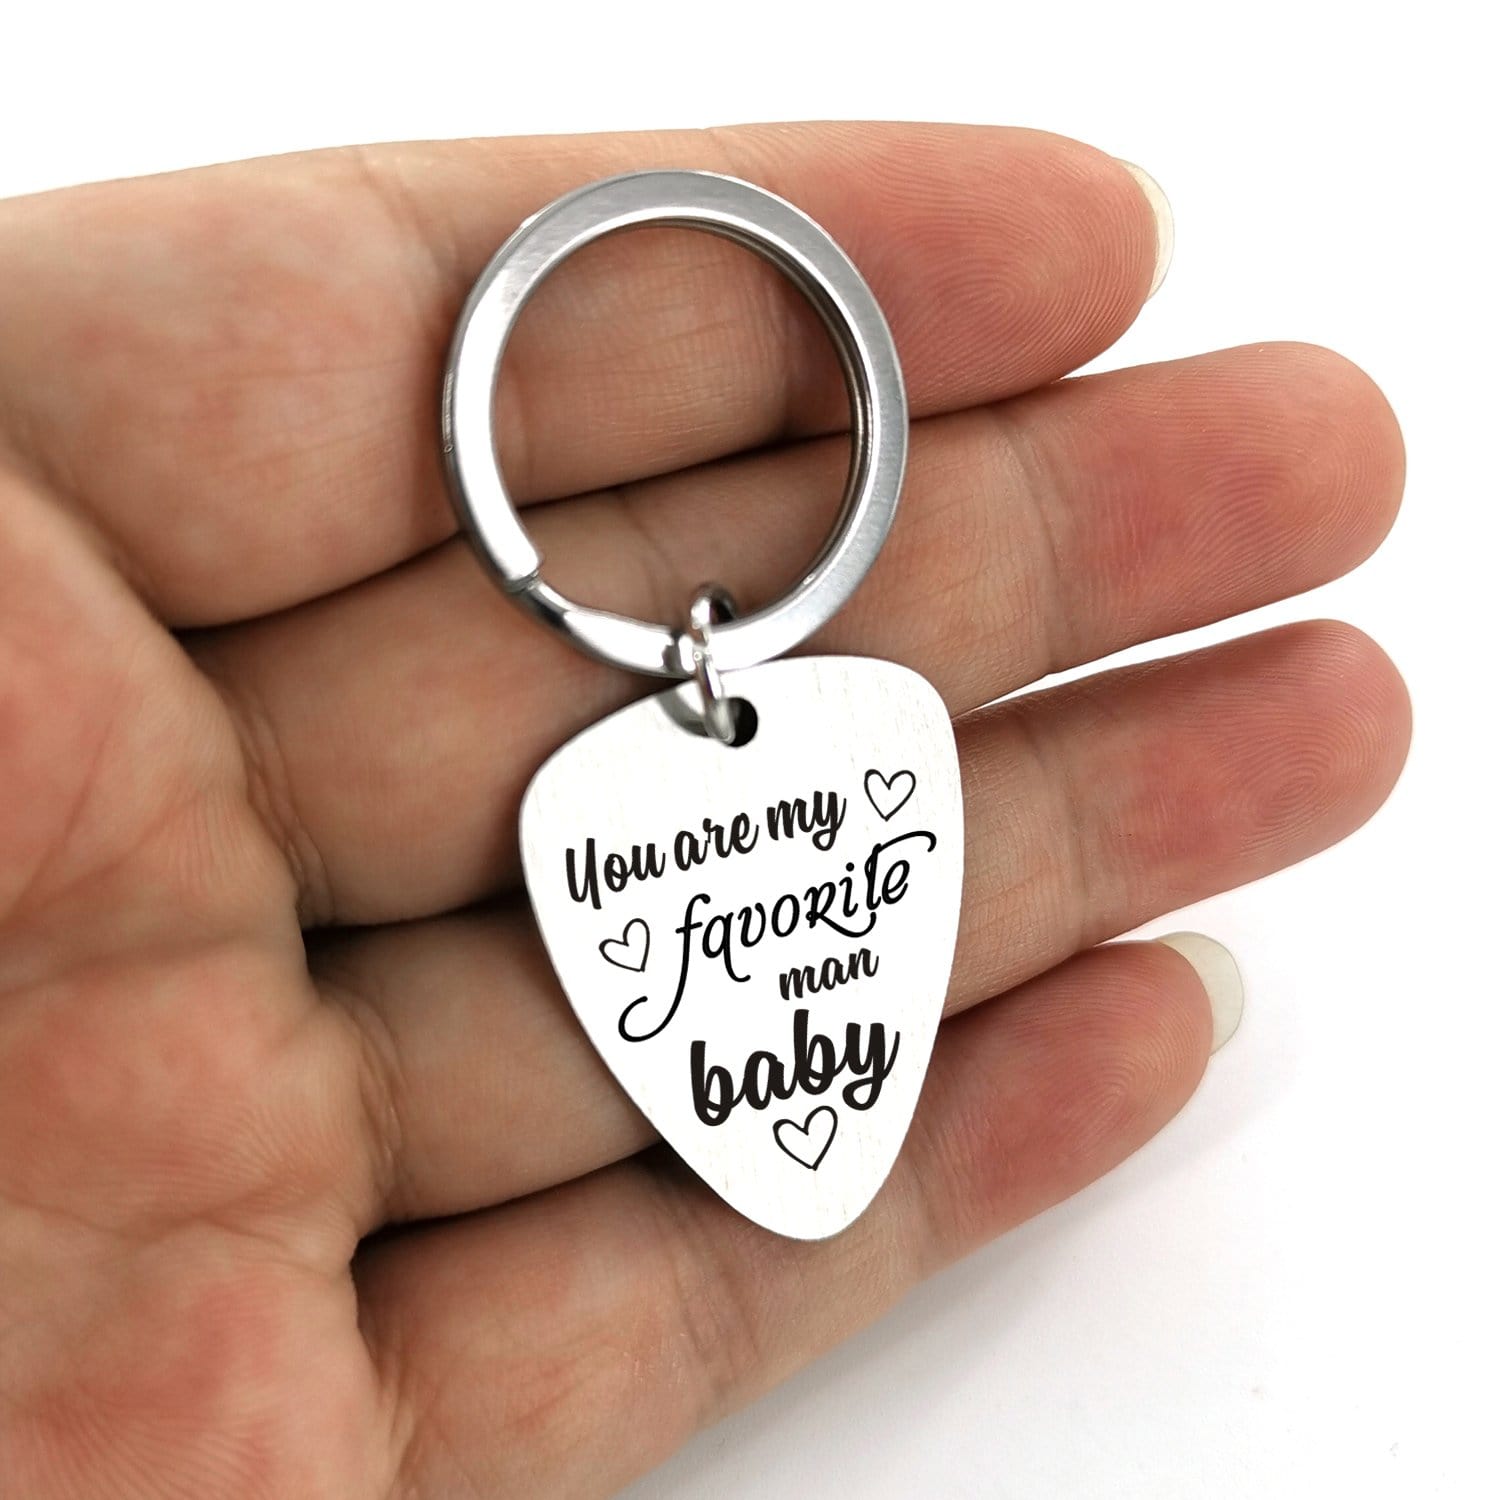 Guitar Pick Keychains You Are My Favorite Man Baby - Customized Guitar Pick Keychain GiveMe-Gifts